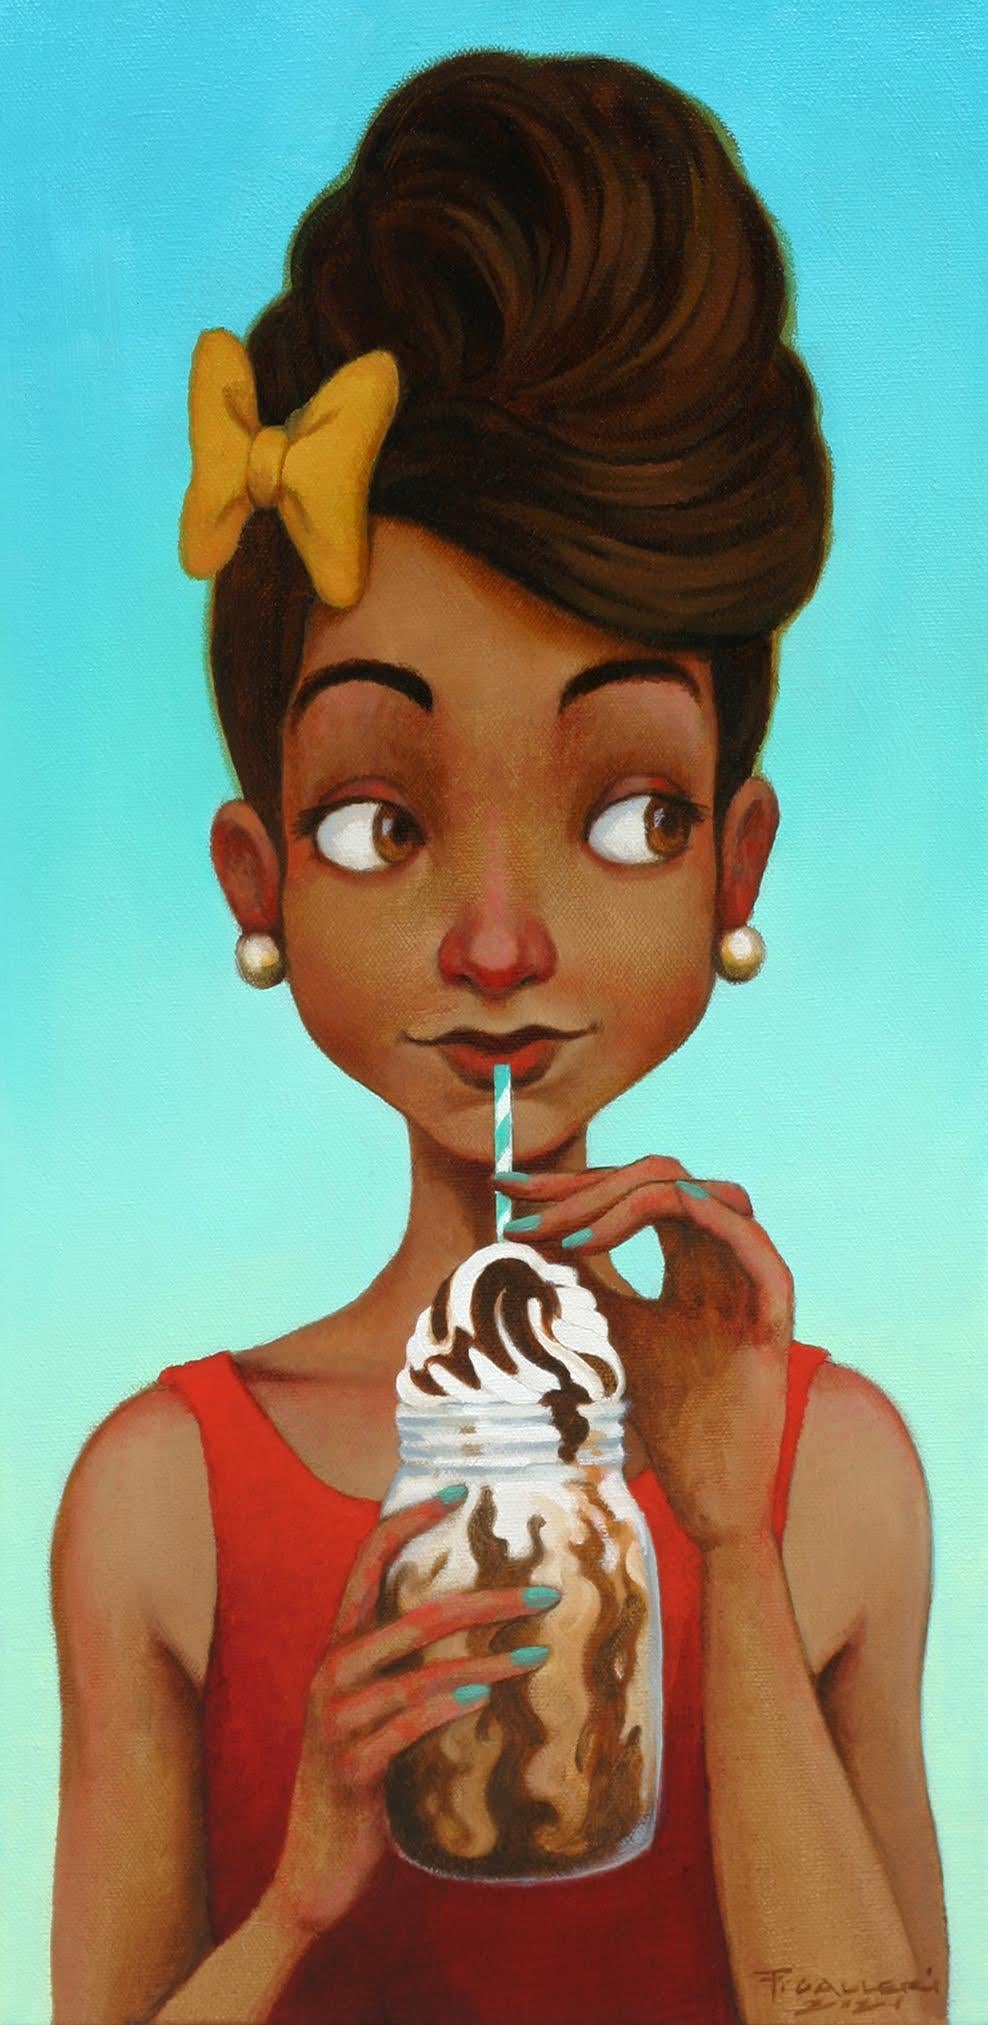 "Ice Cream Monday" small scale oil painting of a woman drinking a milkshake